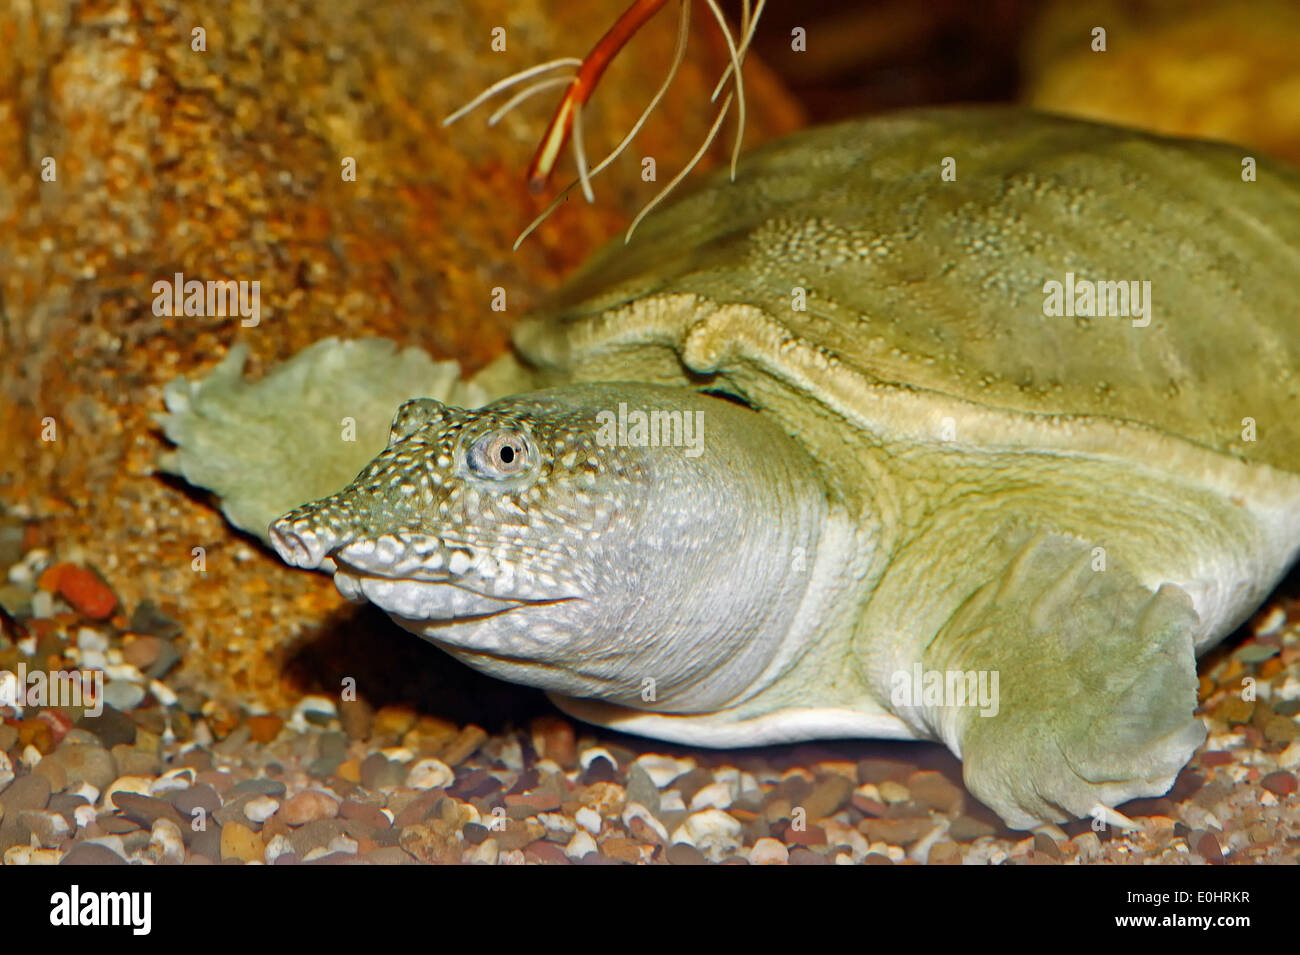 Chinese Softshell Turtle, Chinese Soft Shell Turtle (Trionyx sinensis) Stock Photo